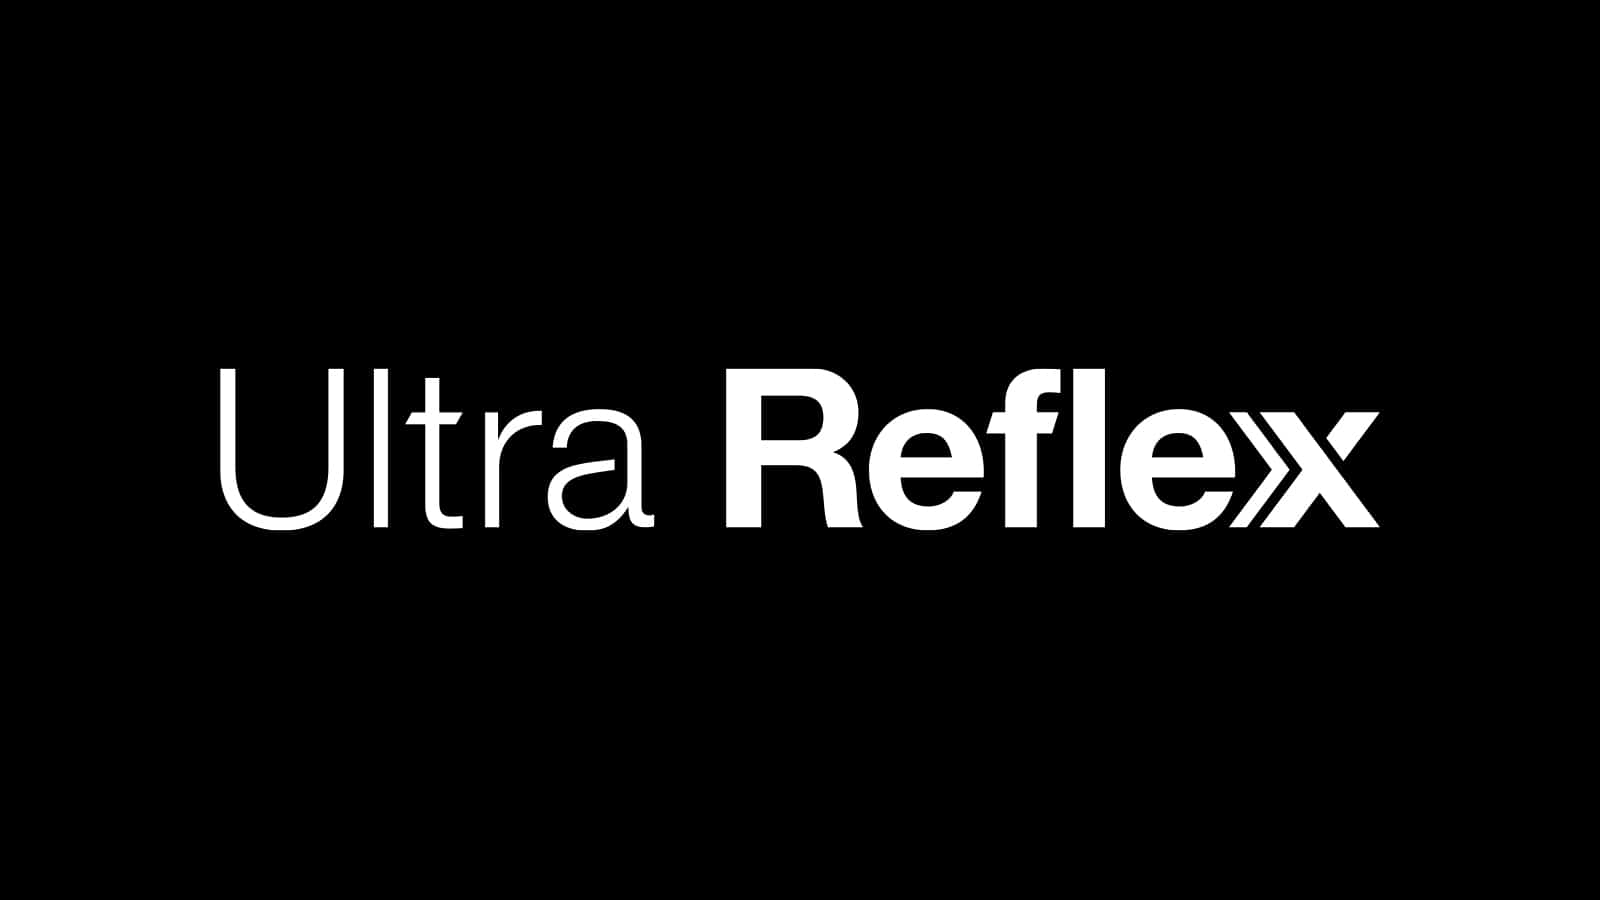 Ultra Reflex Sound Solution for Direct View Displays